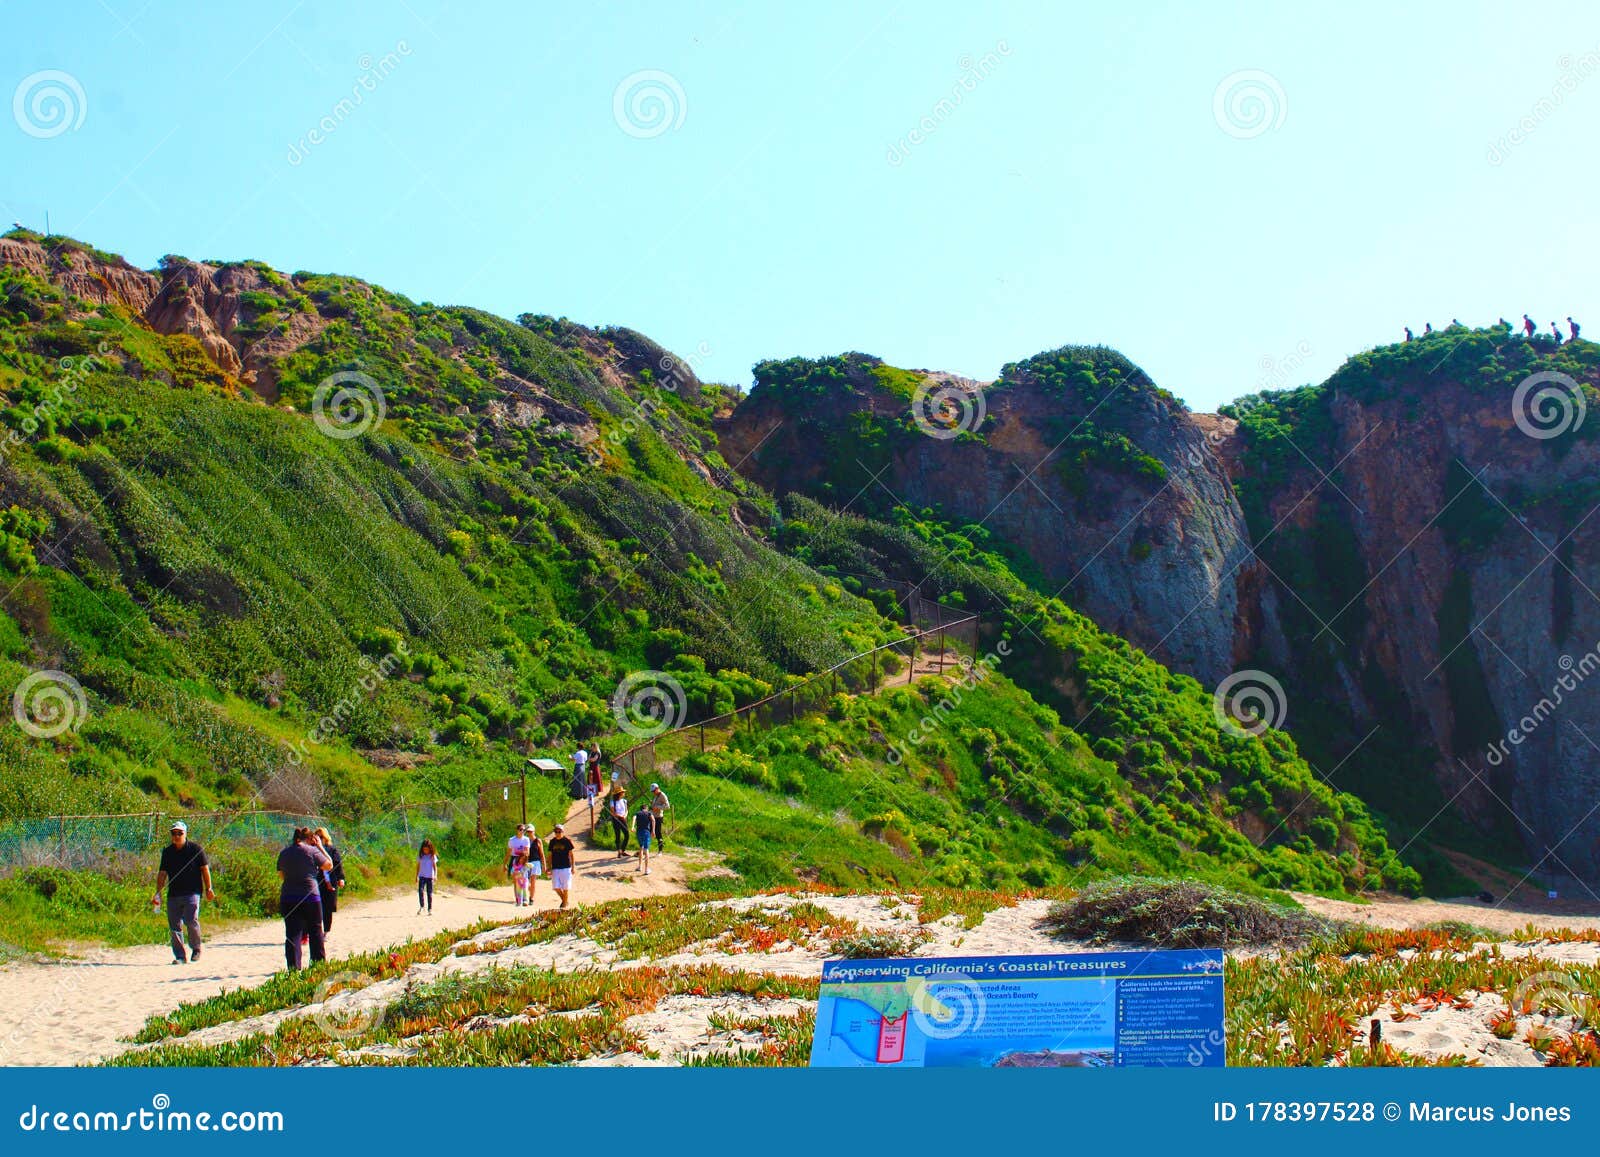 people hiking at the beach with lush green hillsides